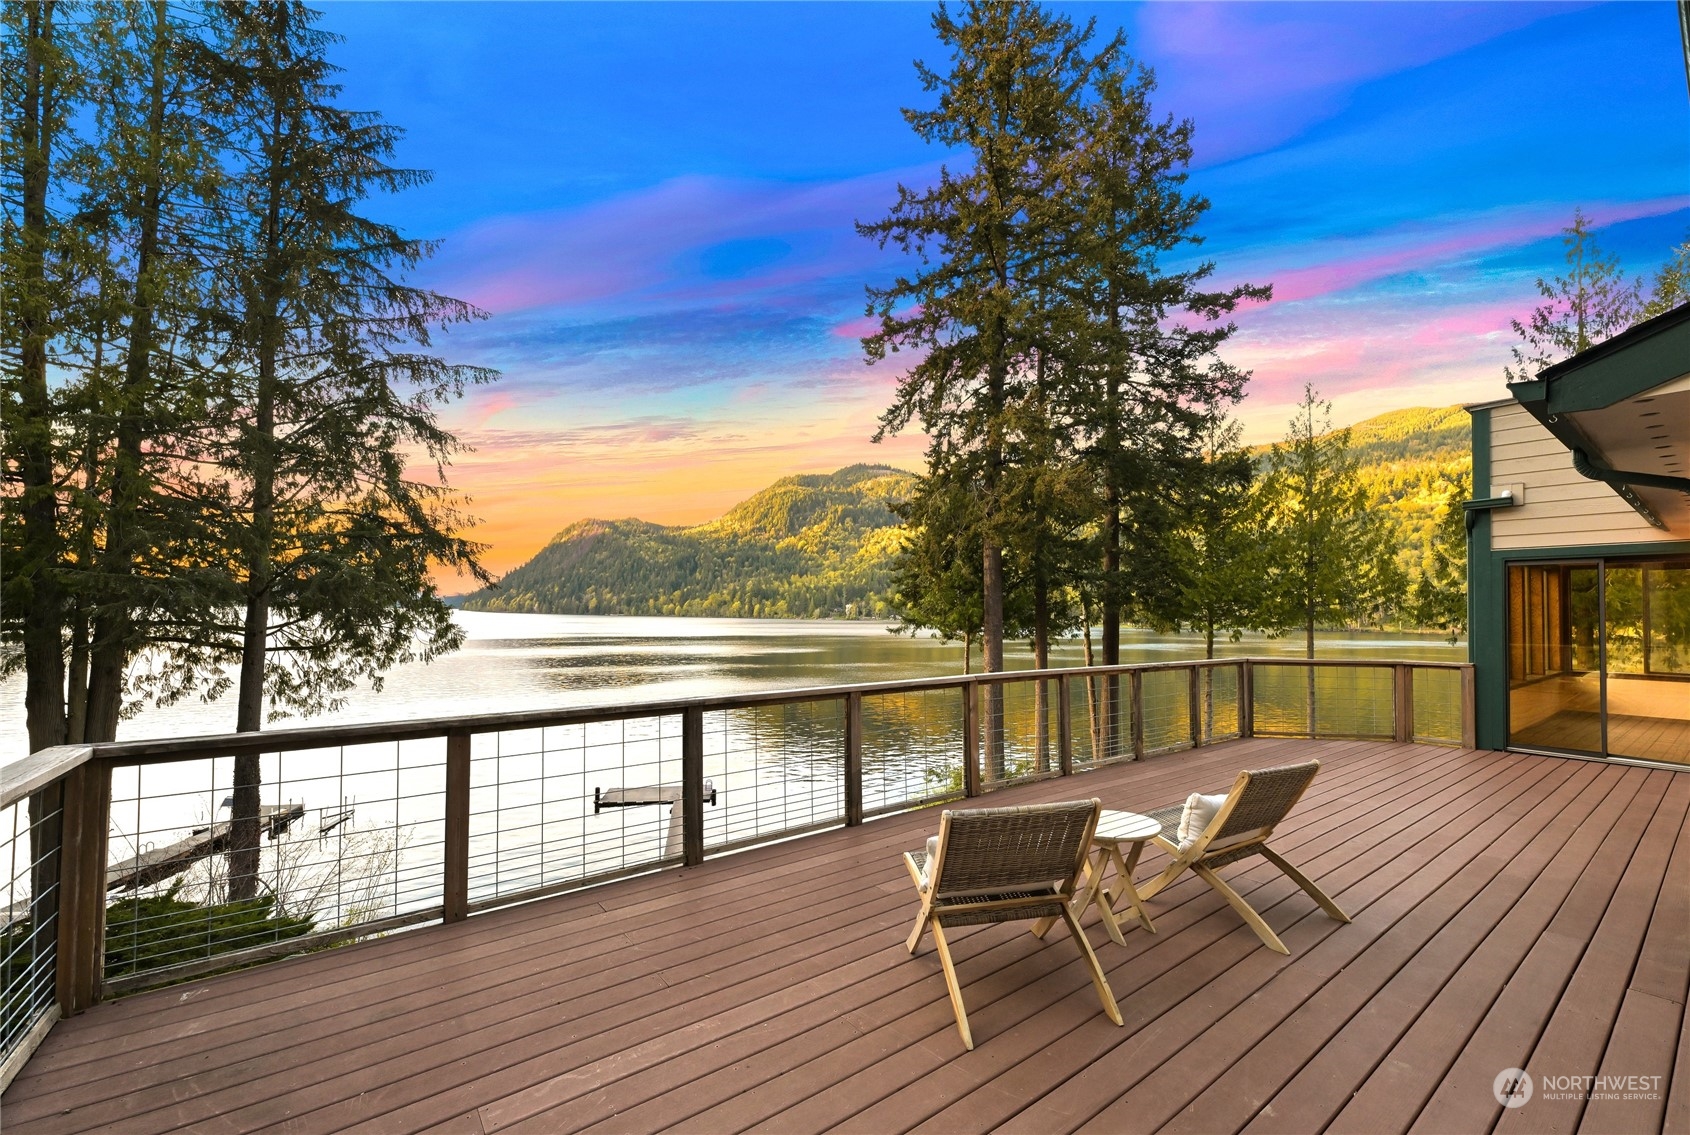 a view of a lake from deck with patio